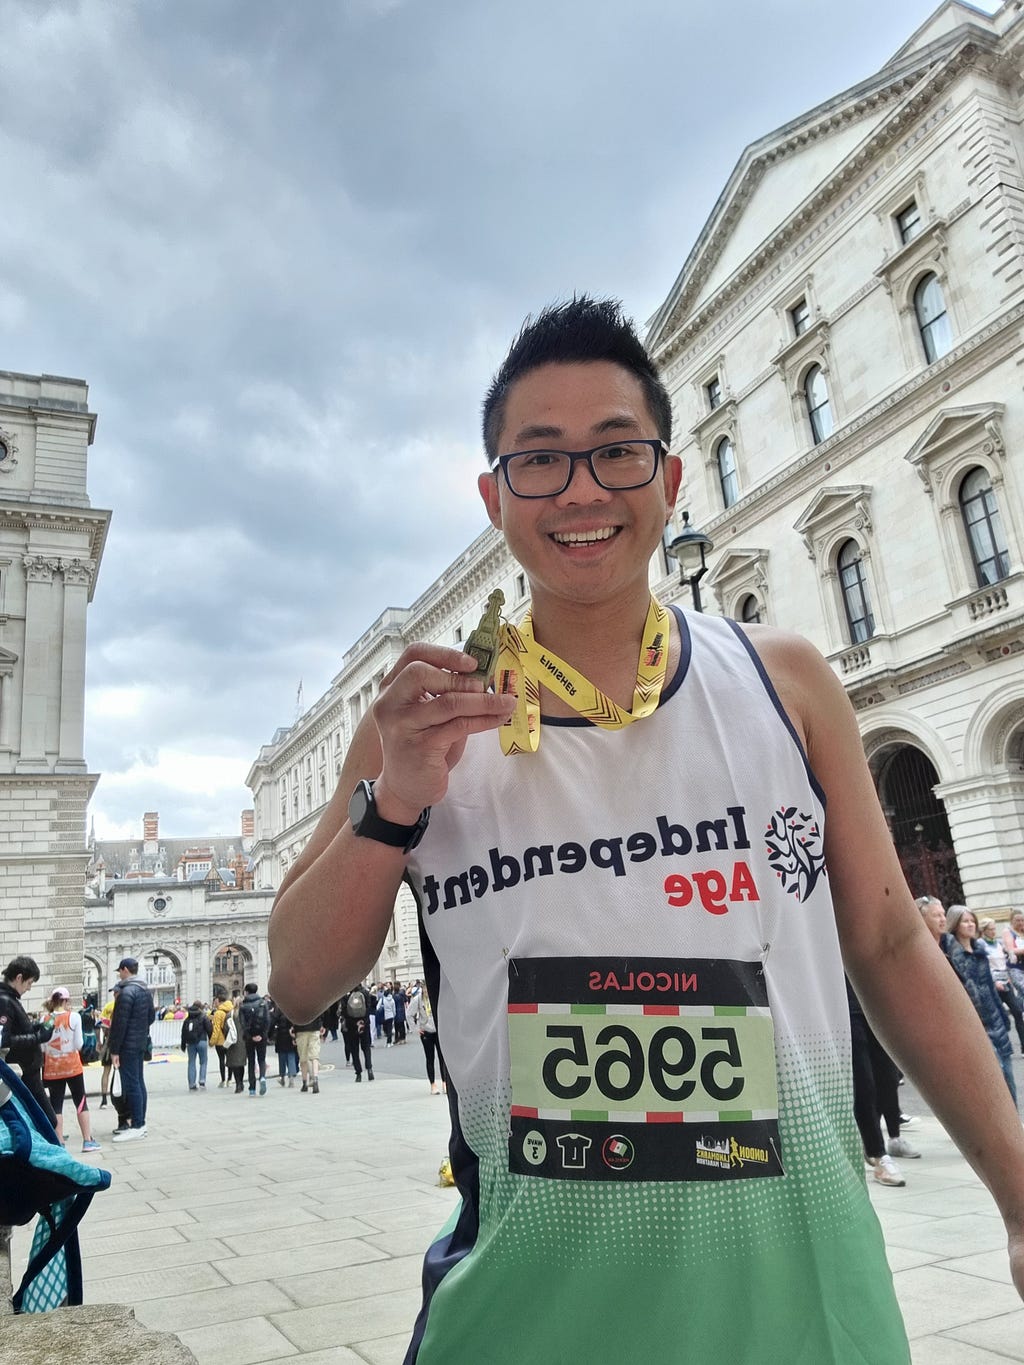 Nicolas, a man with short dark hair and glasses, smiles at the camera while wearing an Independent Age running vest and holding up a yellow running medal he’s been awarded.